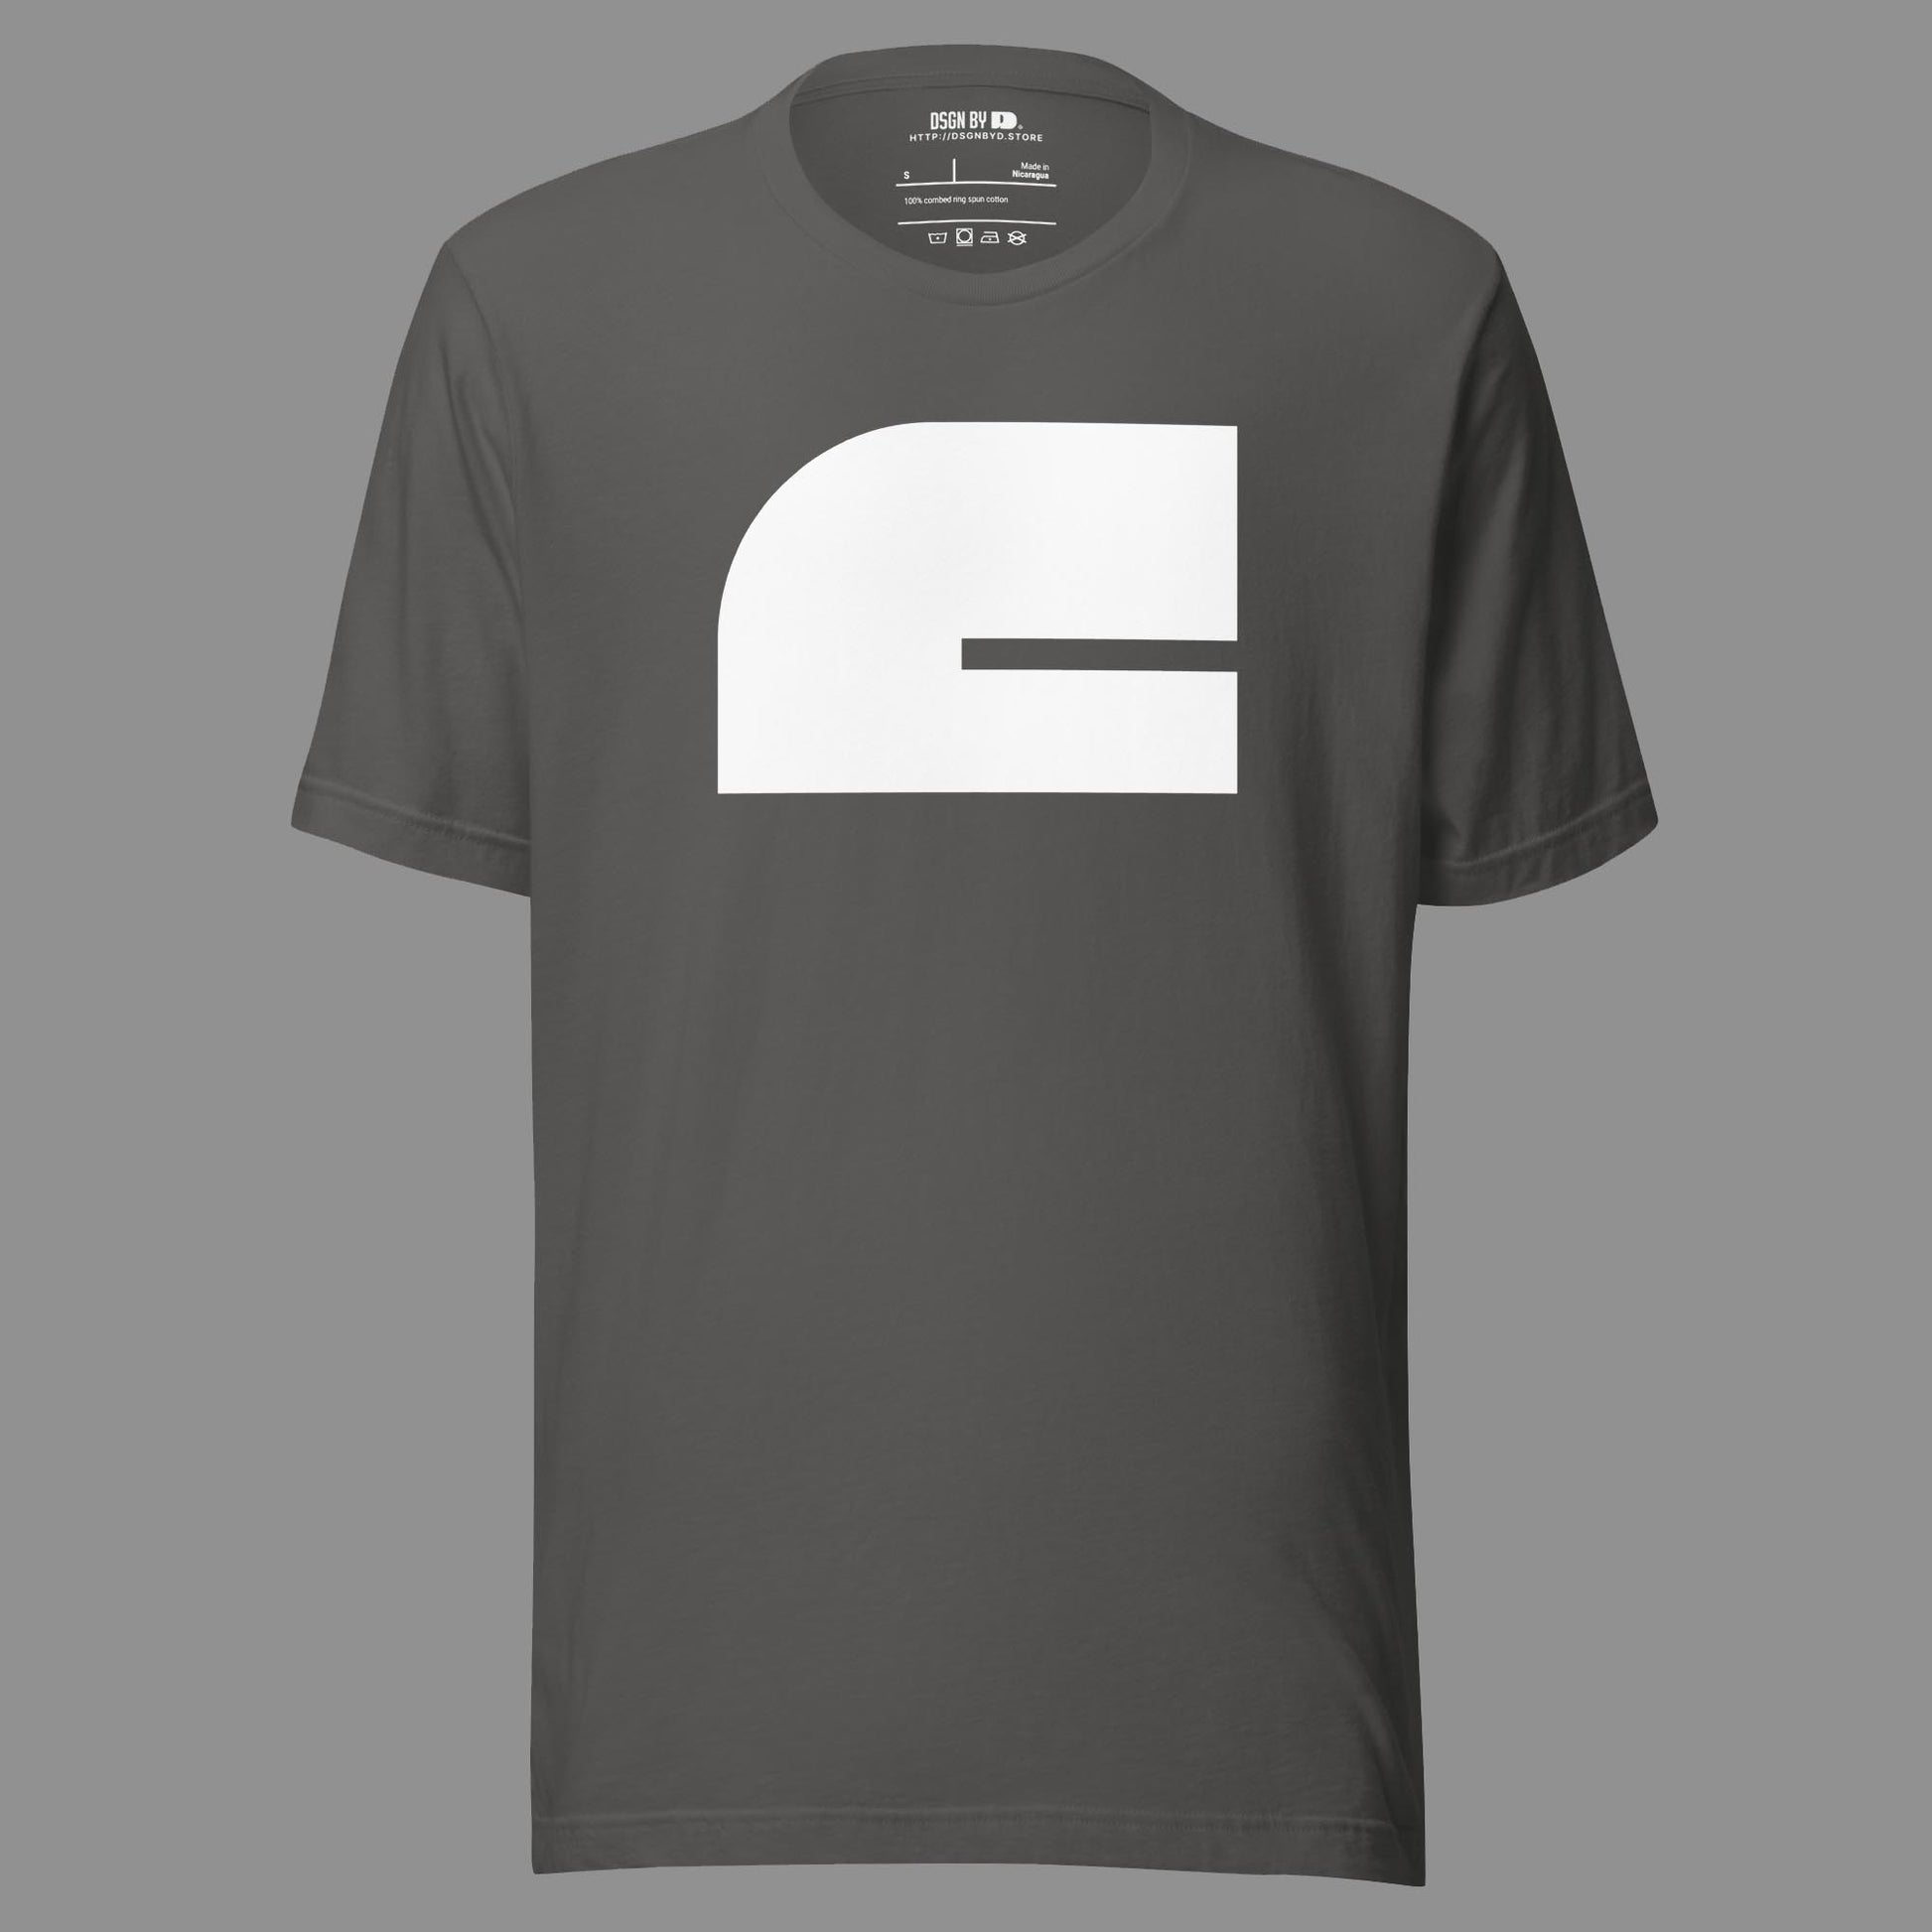 A grey cotton unisex graphic tee with letter C.